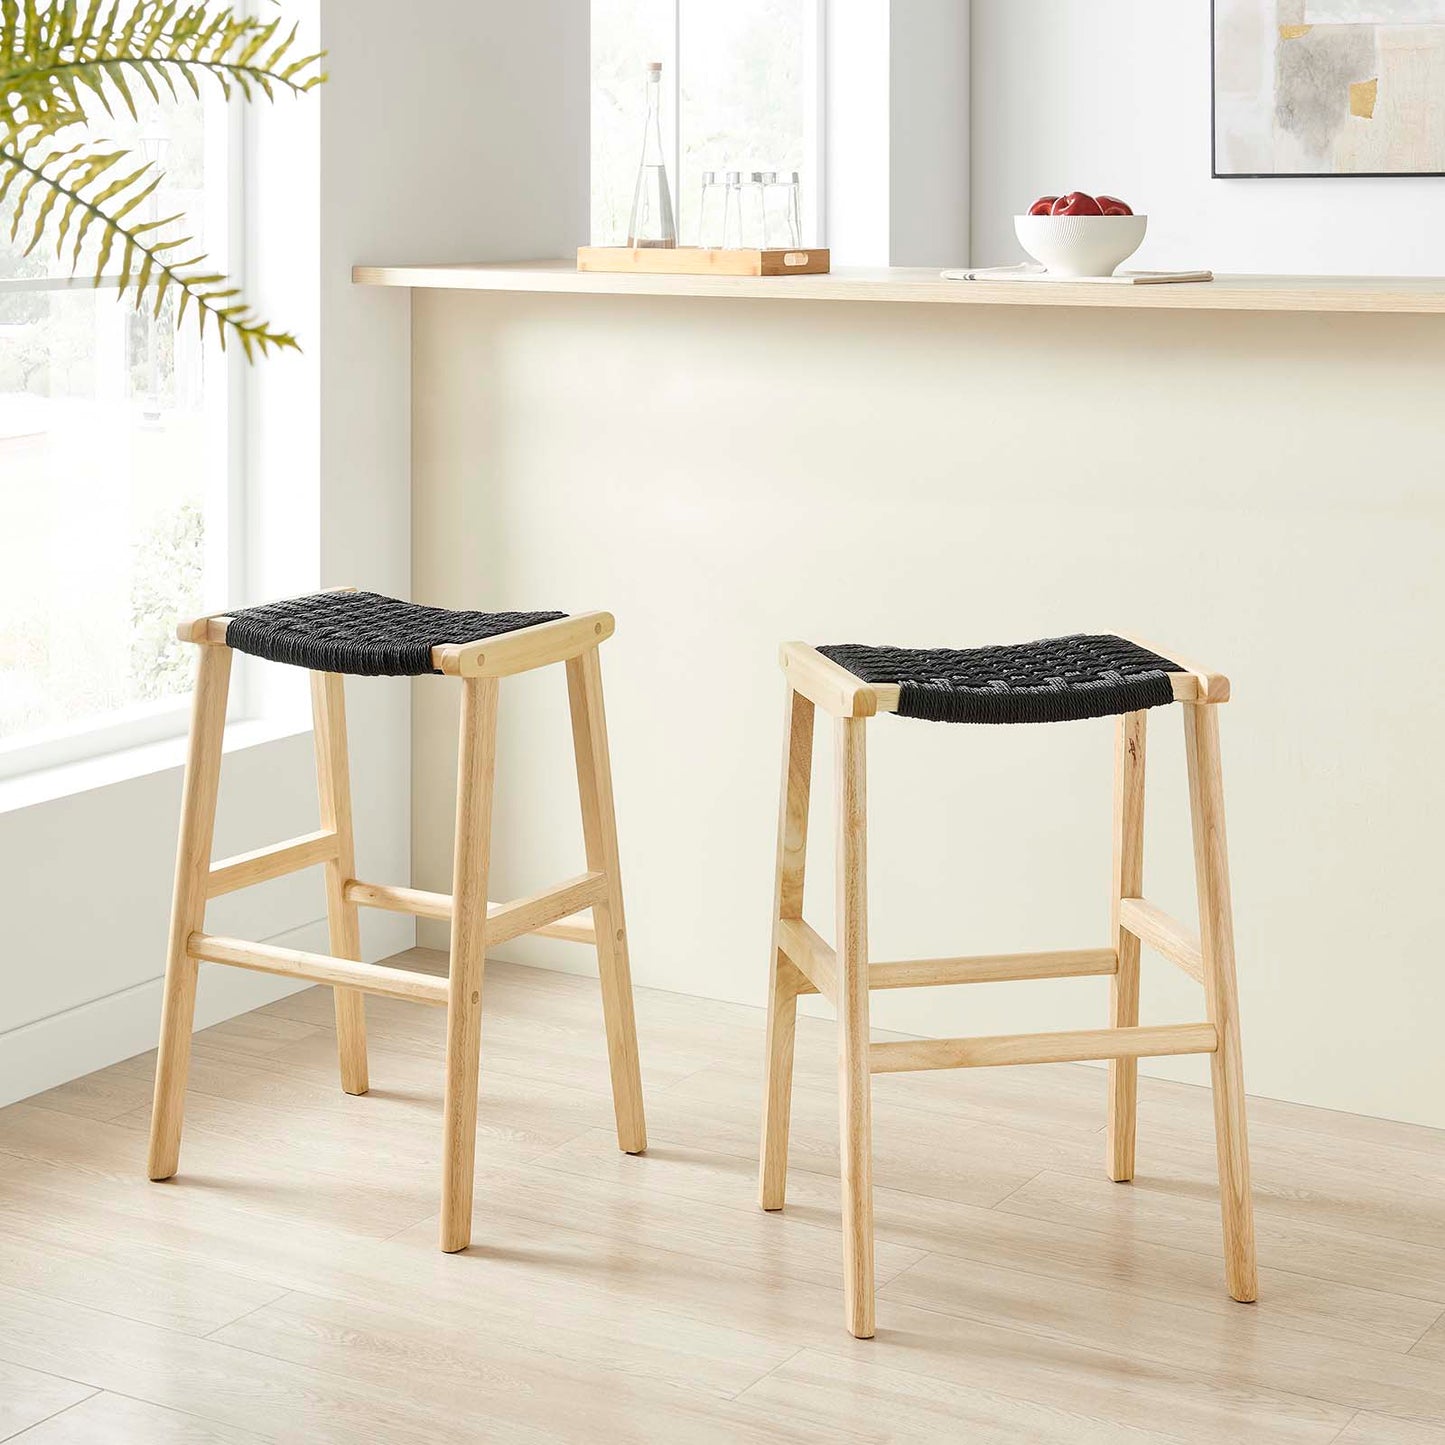 Saoirse Woven Rope Wood Bar Stool - Set of 2 By Modway - EEI-6550 | Bar Stools | Modway - 7